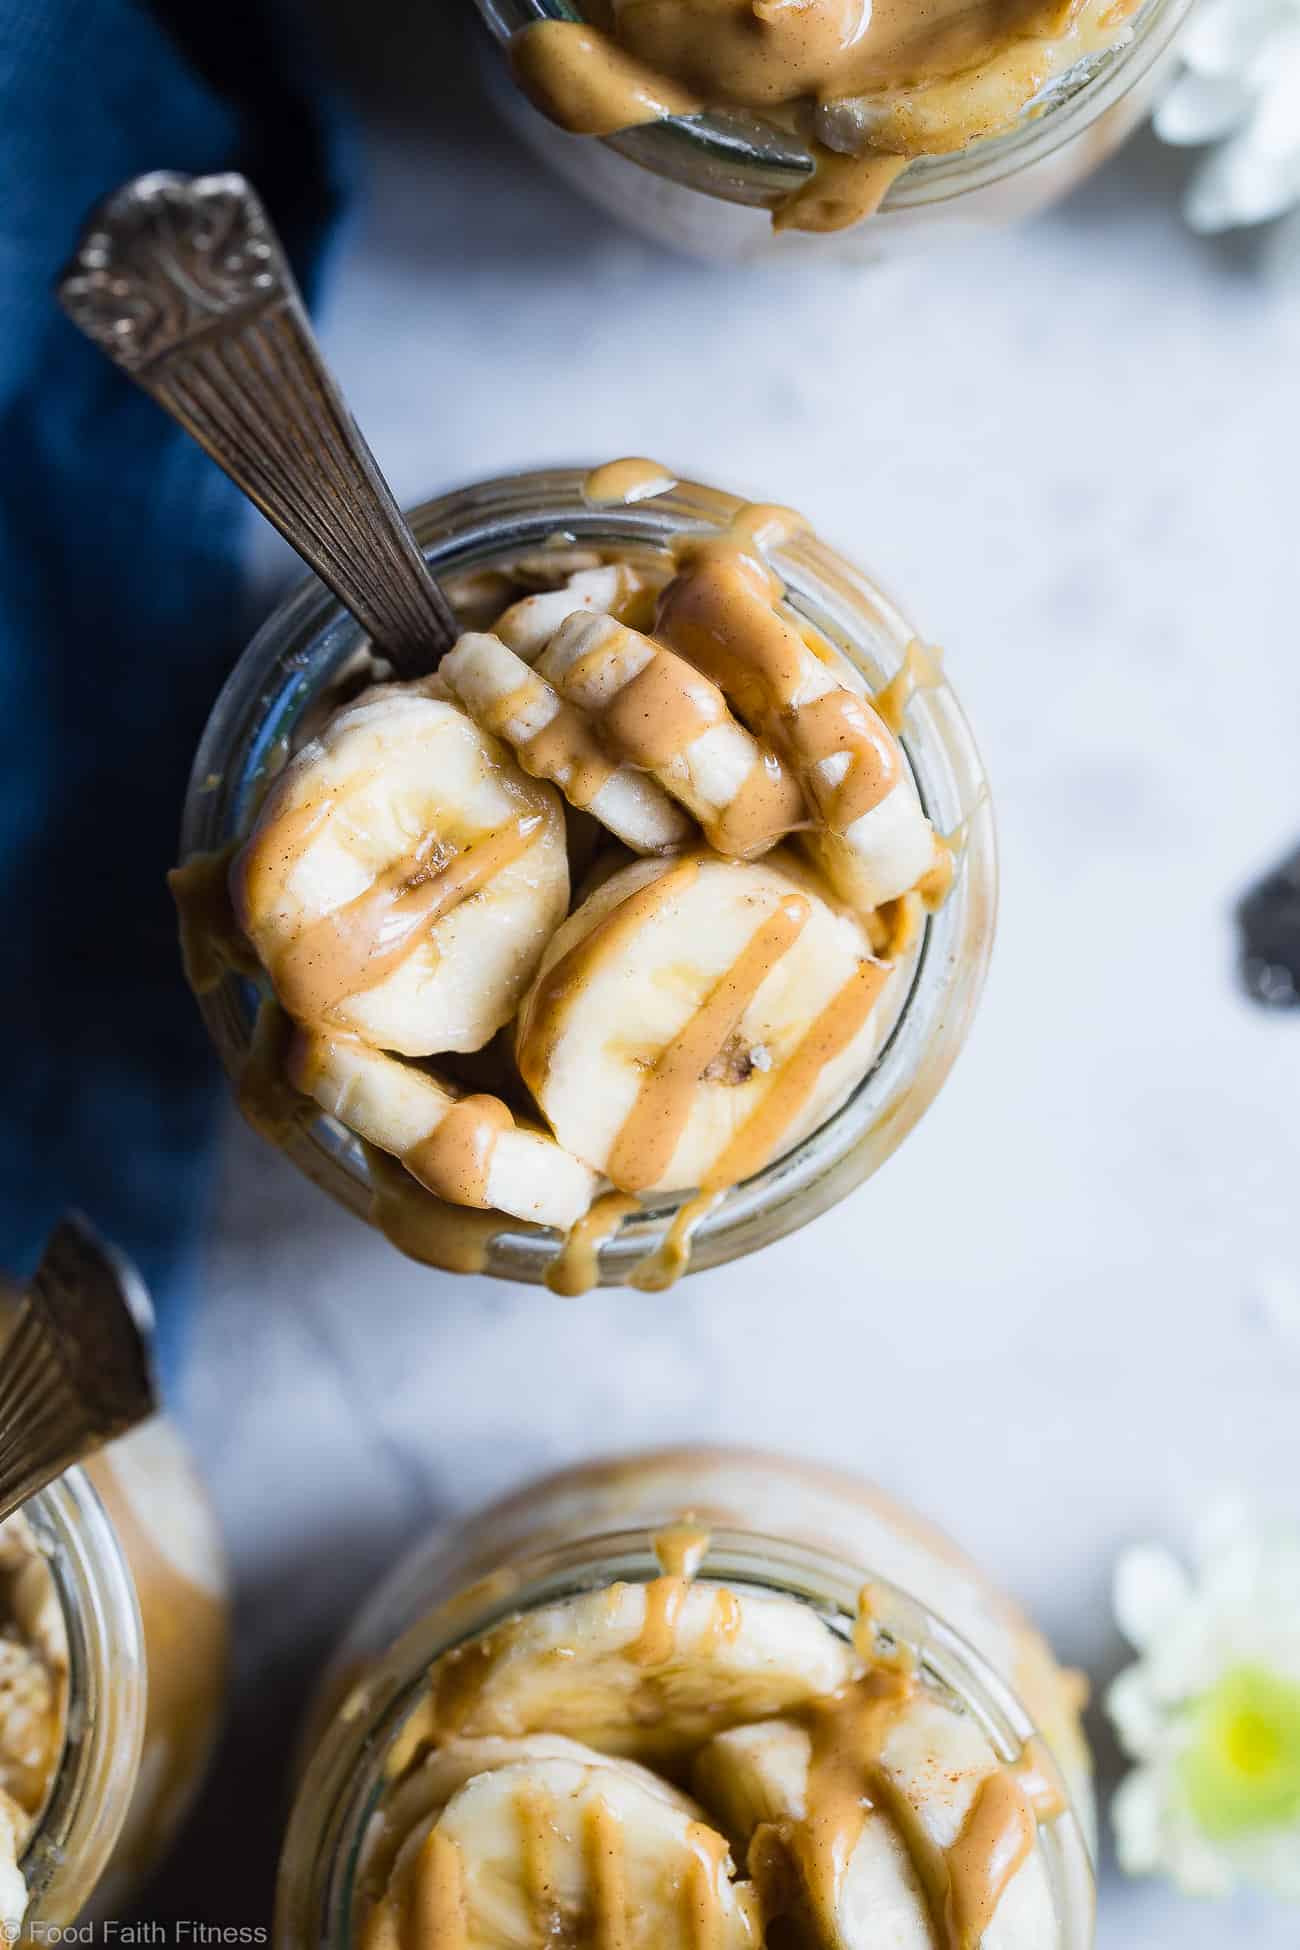 Banana Peanut Butter Overnight Oats Recipe with Almond Milk - This make ahead, vegan overnight oats with peanut butter is a healthy, 4 ingredient way to start the day! dairy, sugar and, gluten free and kid friendly too! | Foodfaithfitness.com | @FoodFaithFit